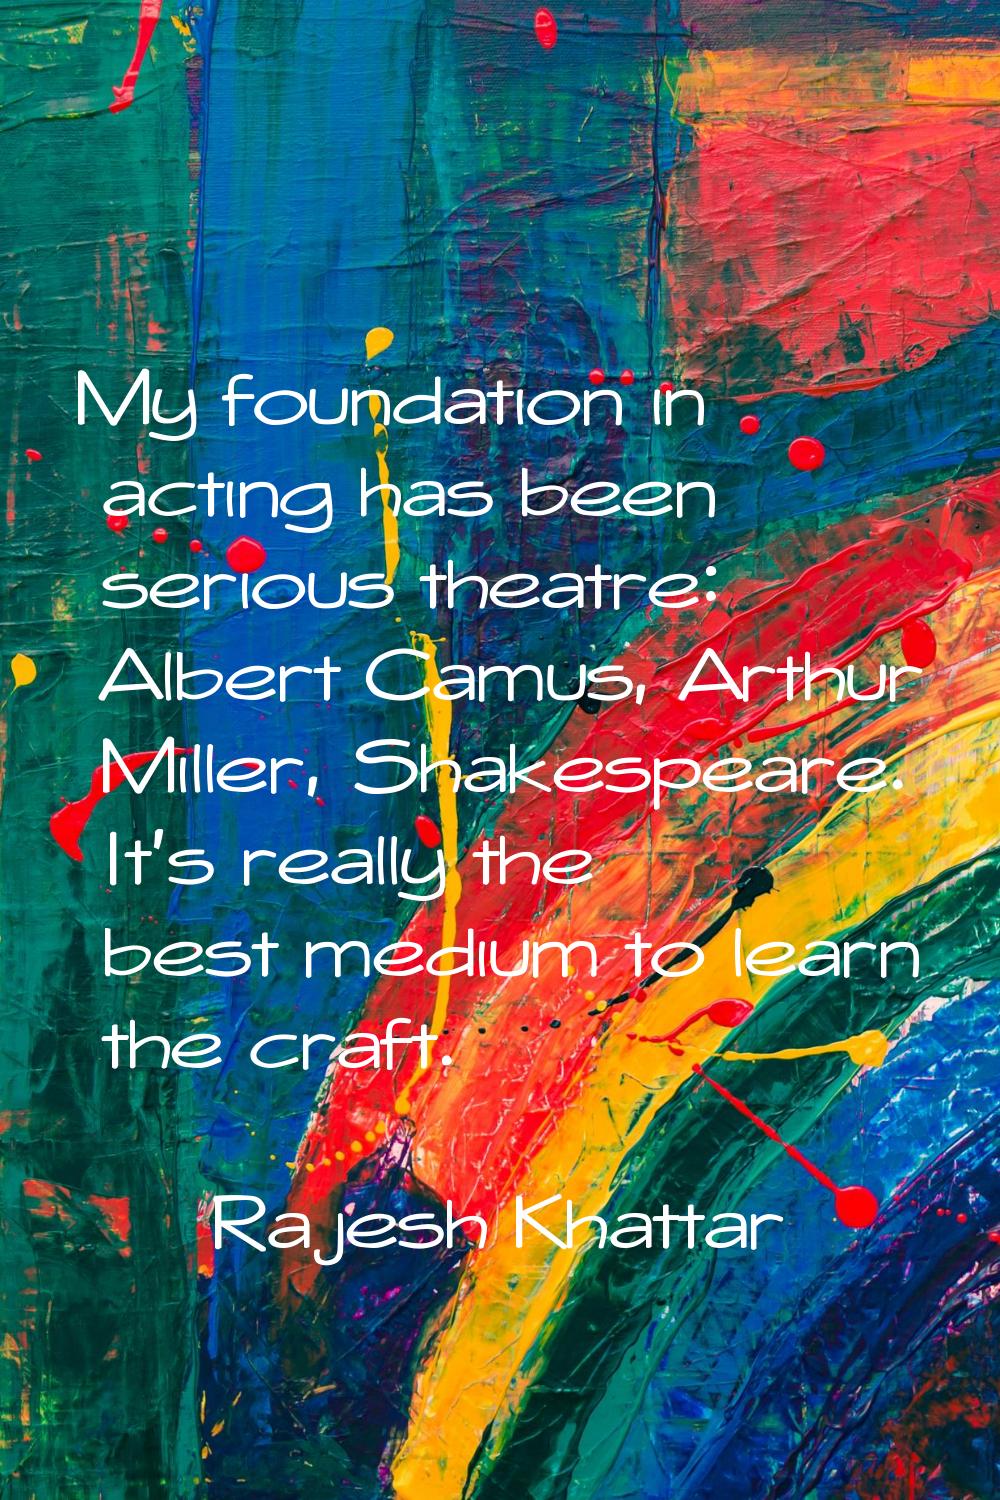 My foundation in acting has been serious theatre: Albert Camus, Arthur Miller, Shakespeare. It's re